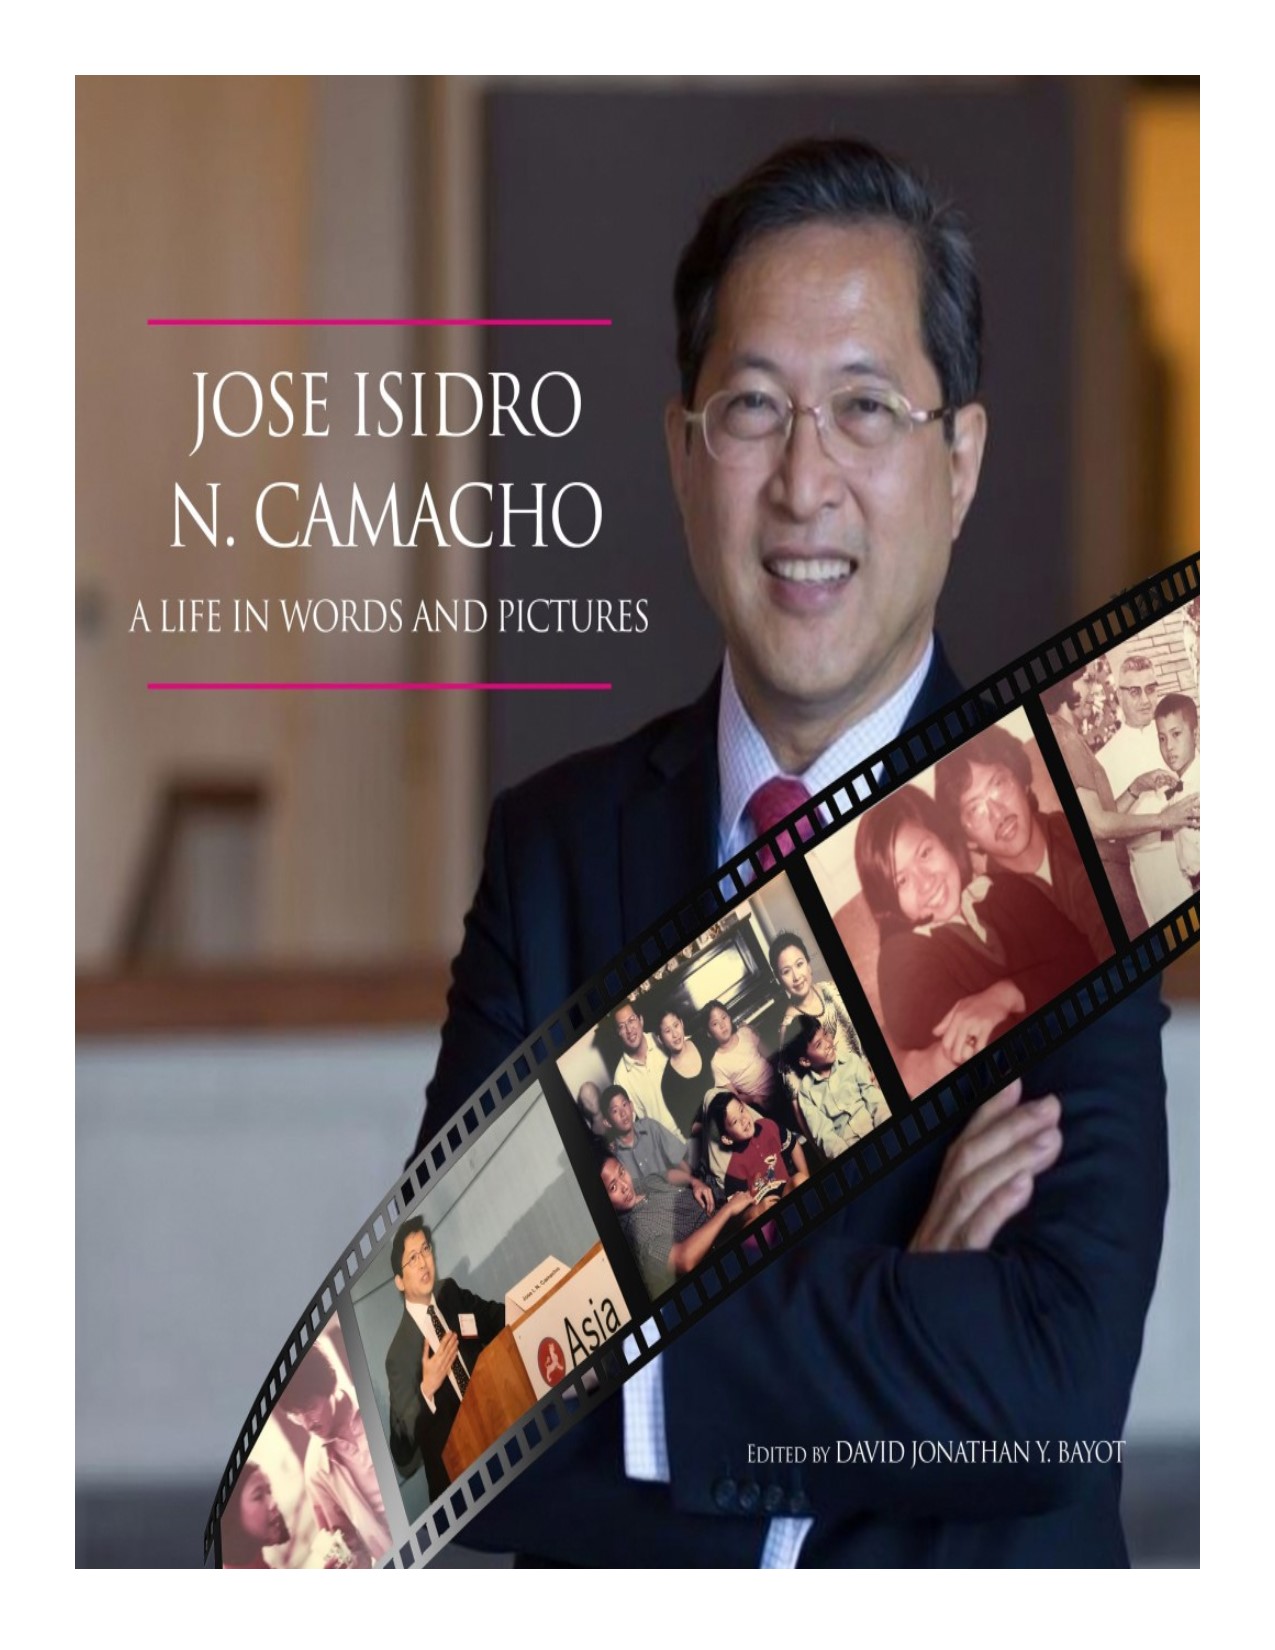 Jose Isidro N. Camacho a life in words and pictures